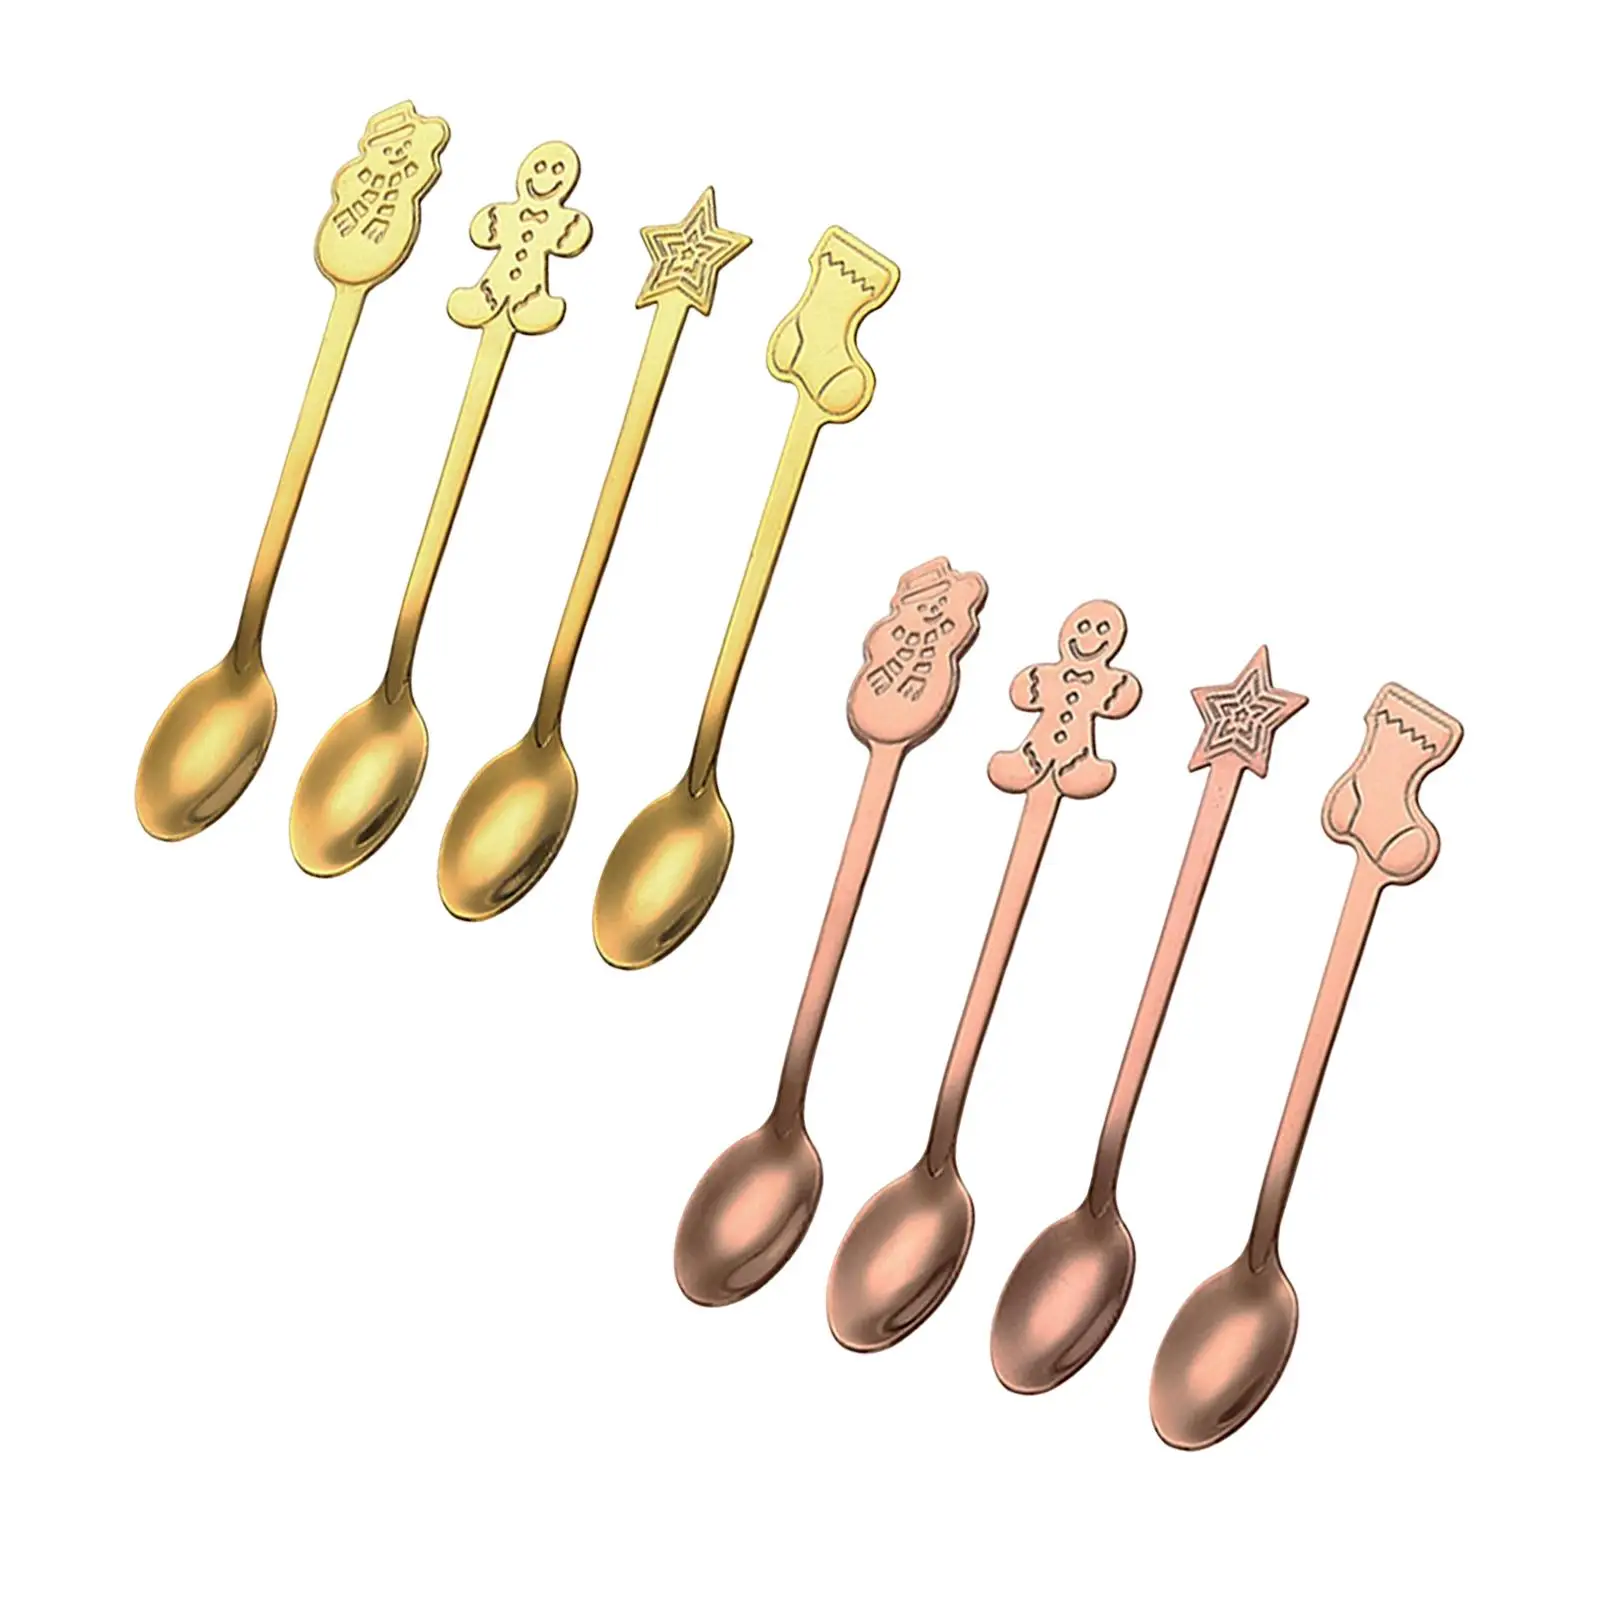 4x Christmas Coffee Spoons Stirring Spoon Stainless Steel Spoon Espresso Spoons Kitchen for Party Dining Room Cafe Dessert Cake